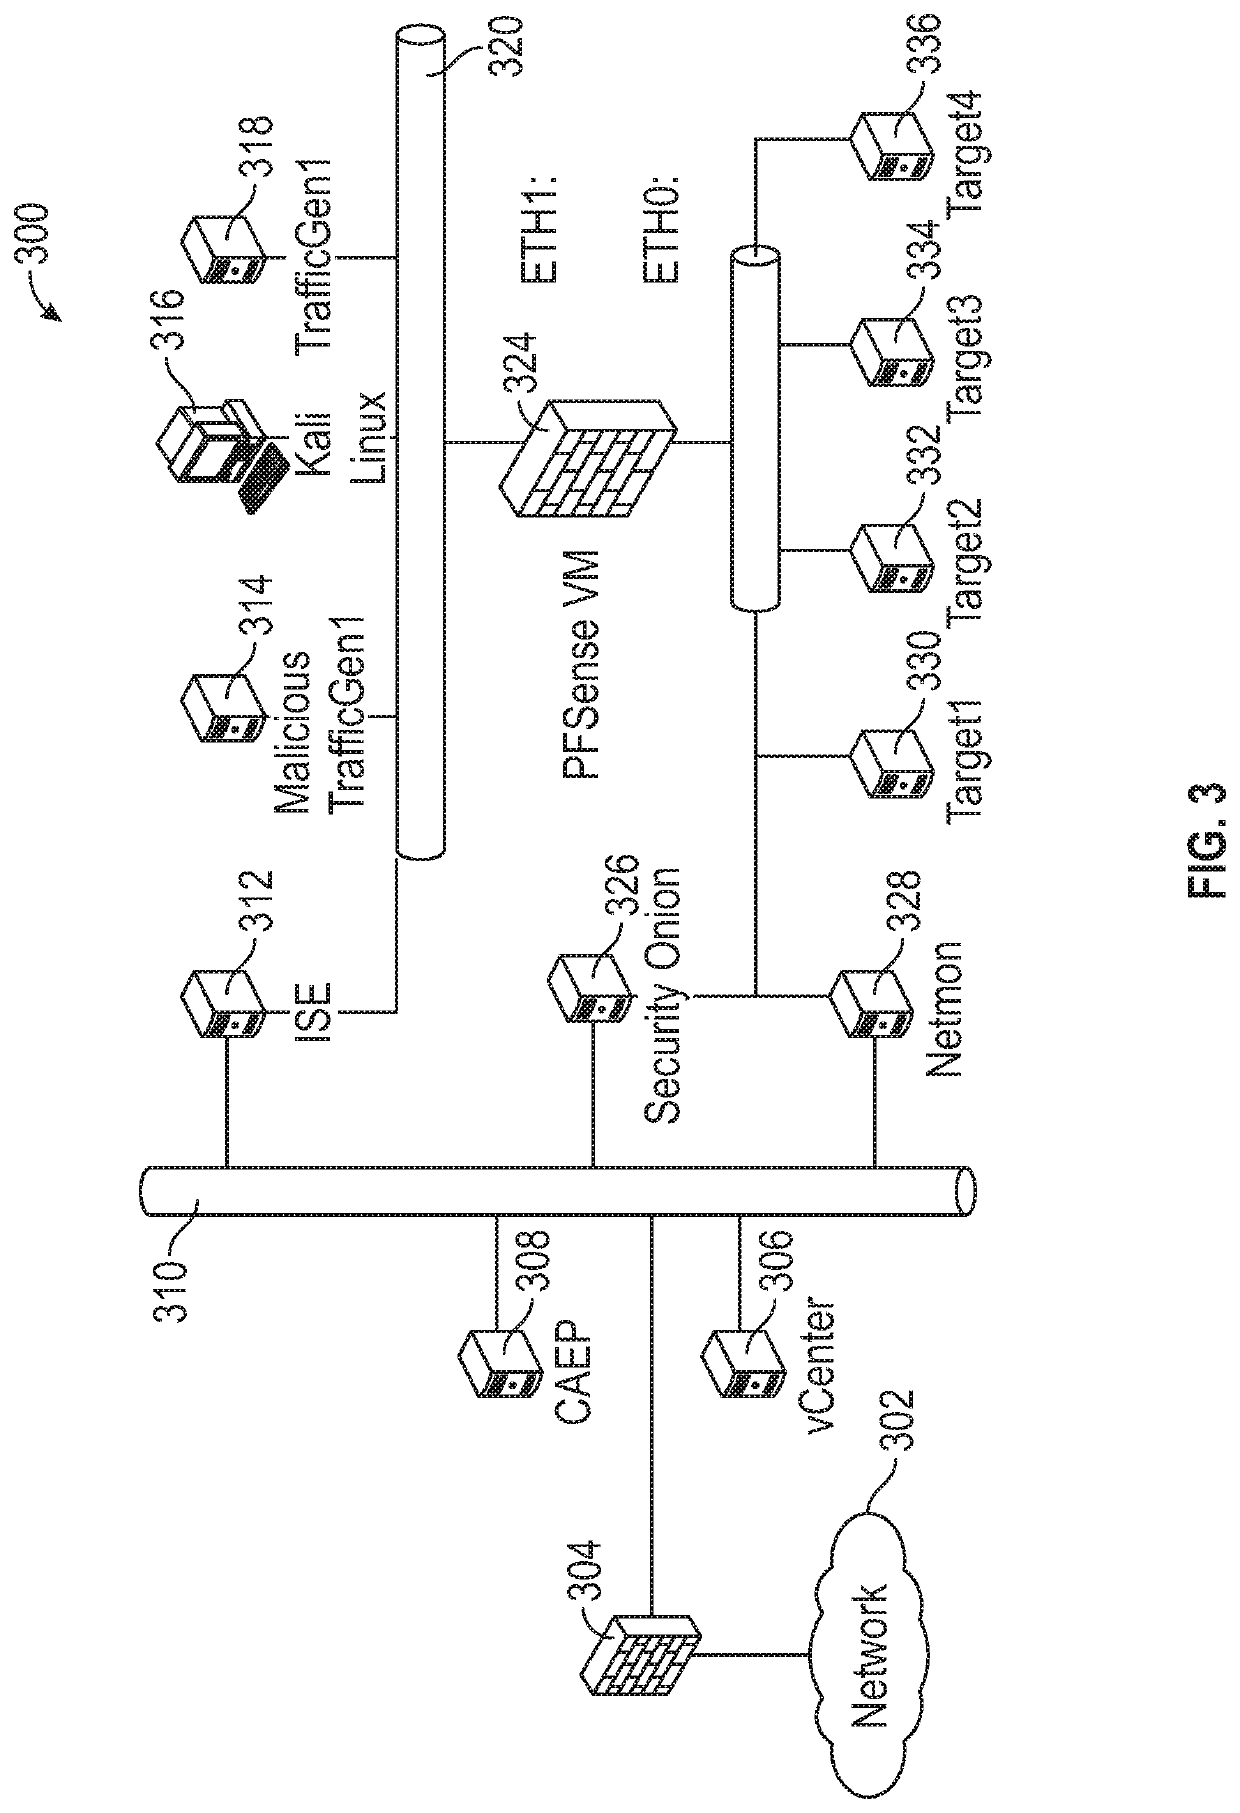 Multi-dimensional cybersecurity skills assessment method and system